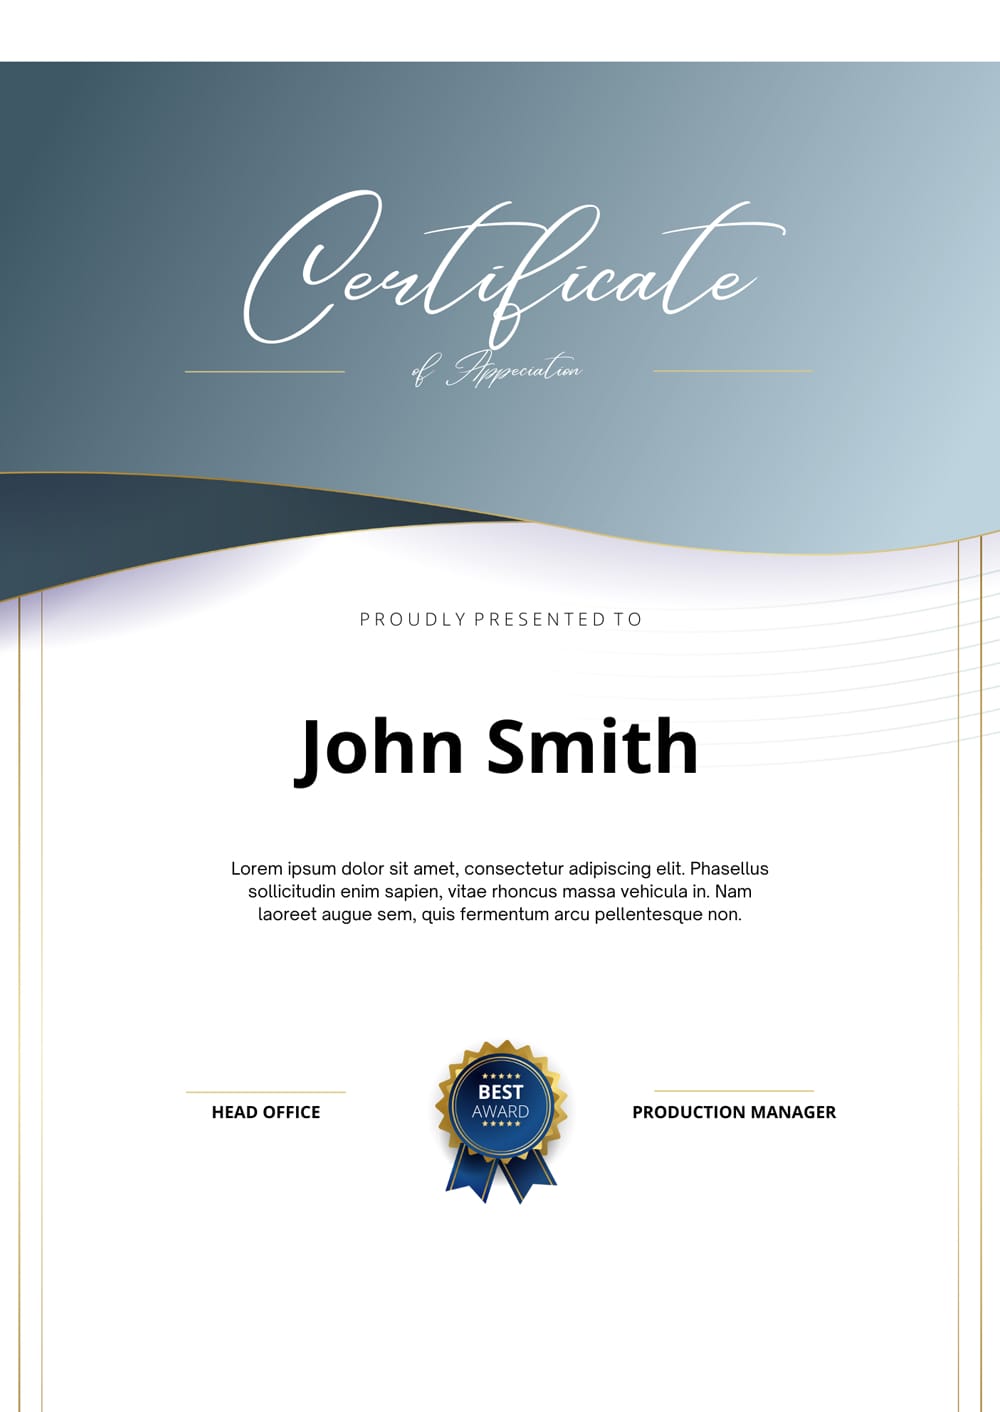 Employee of the Month Award Certificate Template